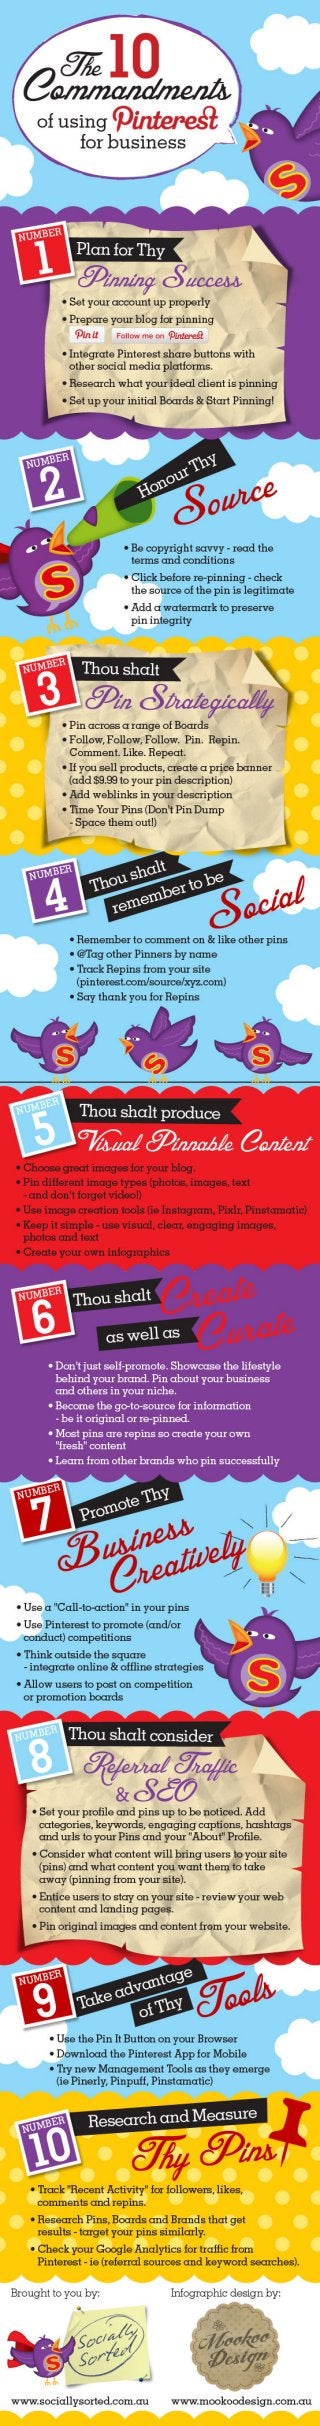 The 10 Commandments of Using Pinterest for Business - Infographic